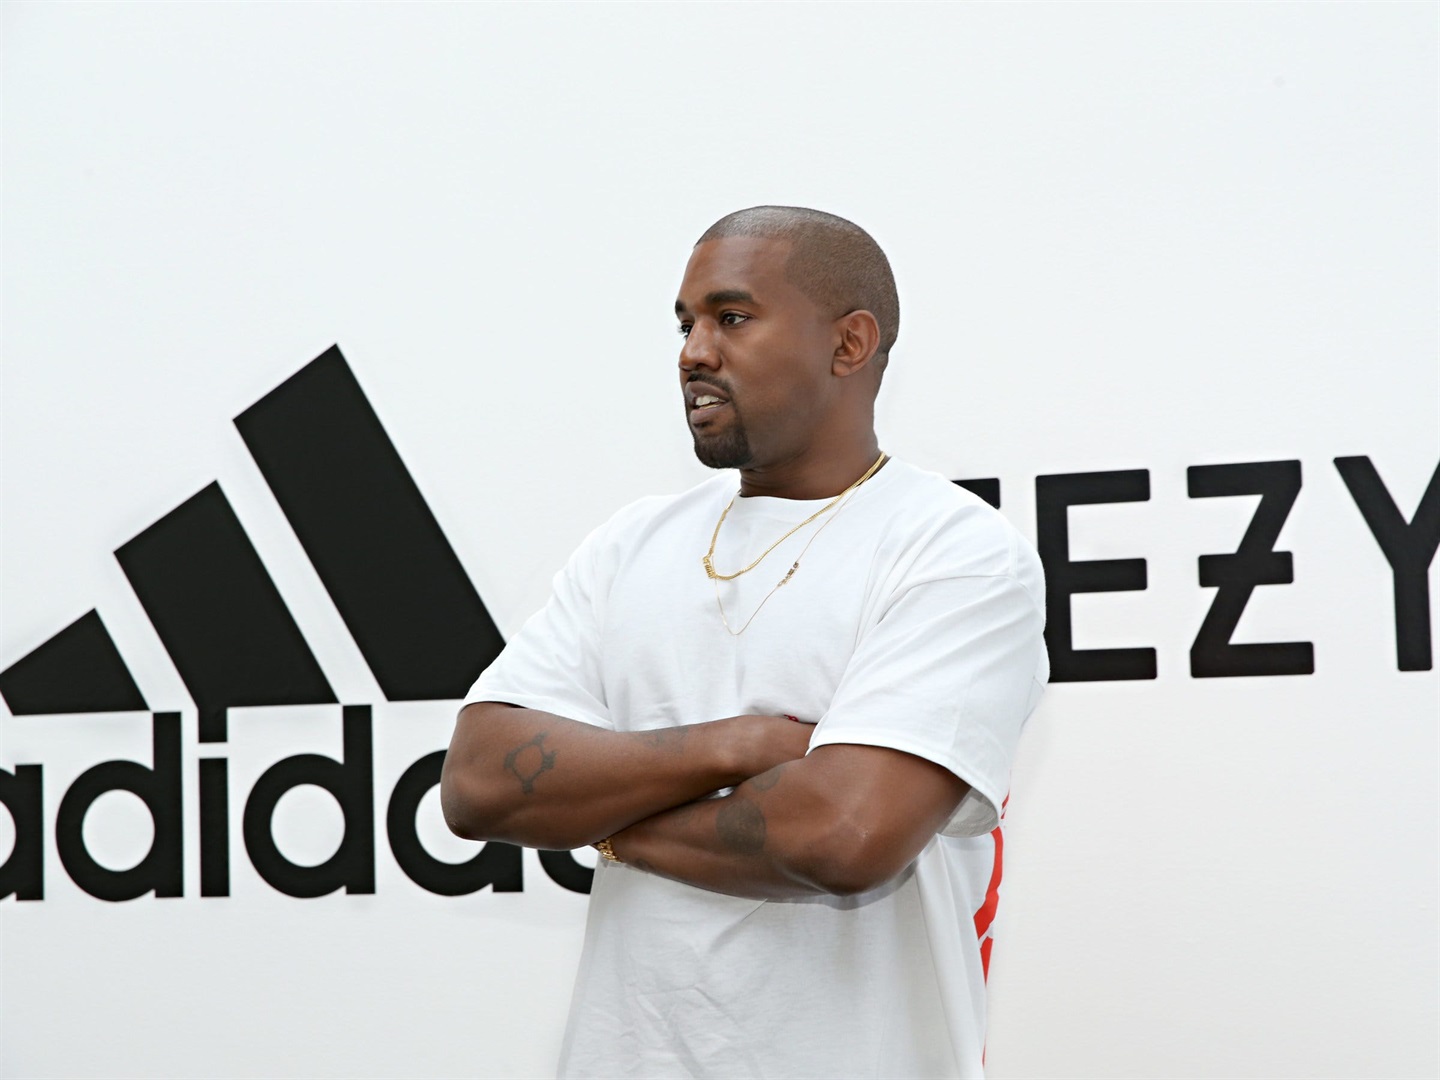 Adidas will sell more of its stock of Yeezy products in August, but hasn't said how much of its proceeds would be donated toward NGOs.